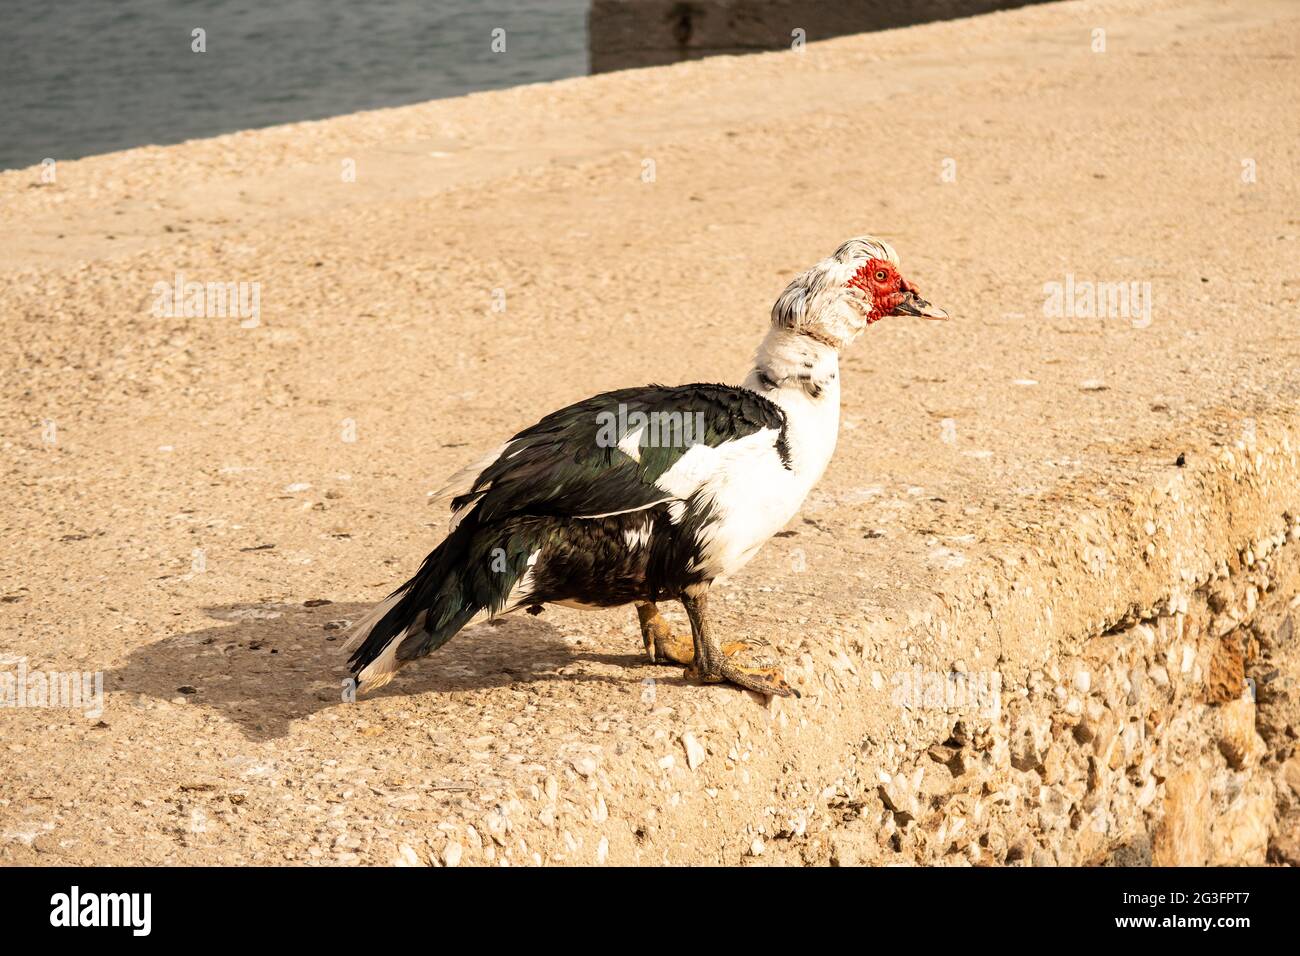 Muscovy black and white duck with a red head walking on concrete pier in Finikas Marina (Port) in Greece. Stock Photo